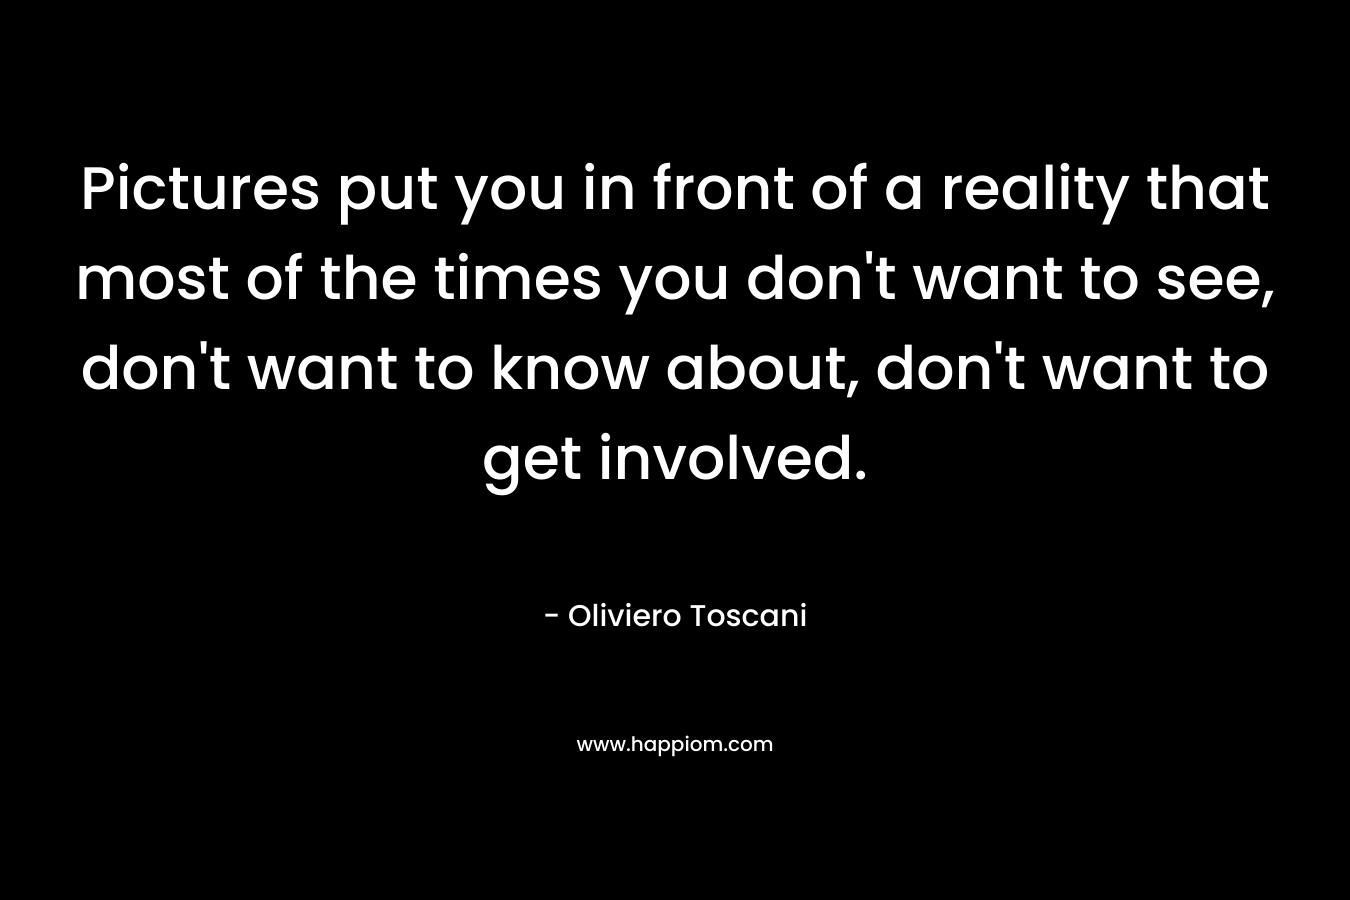 Pictures put you in front of a reality that most of the times you don’t want to see, don’t want to know about, don’t want to get involved. – Oliviero Toscani